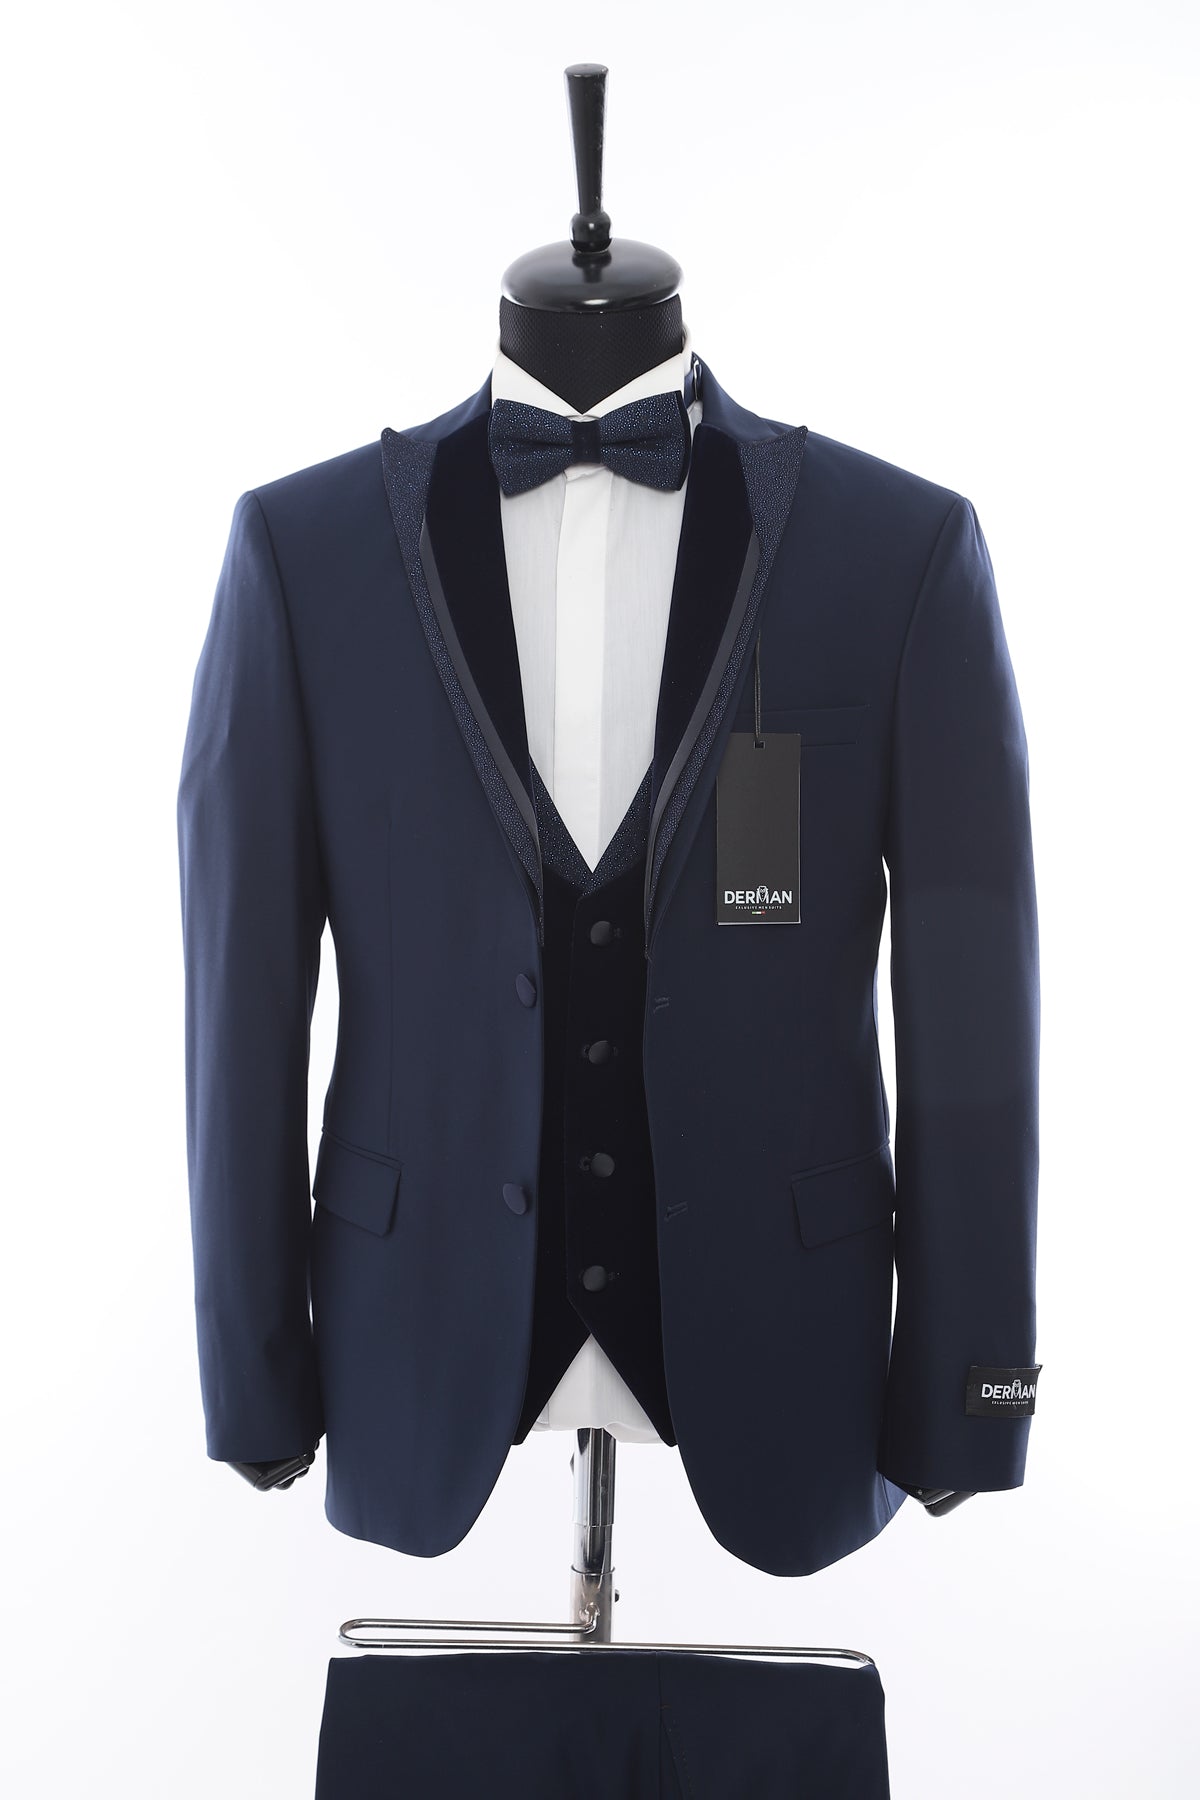 Double Breasted Classic Silvery Collar Navy Tuxedo tailed look at our product, a tuxedo that you can dress up or simplify. This is what we call subtle style that wil